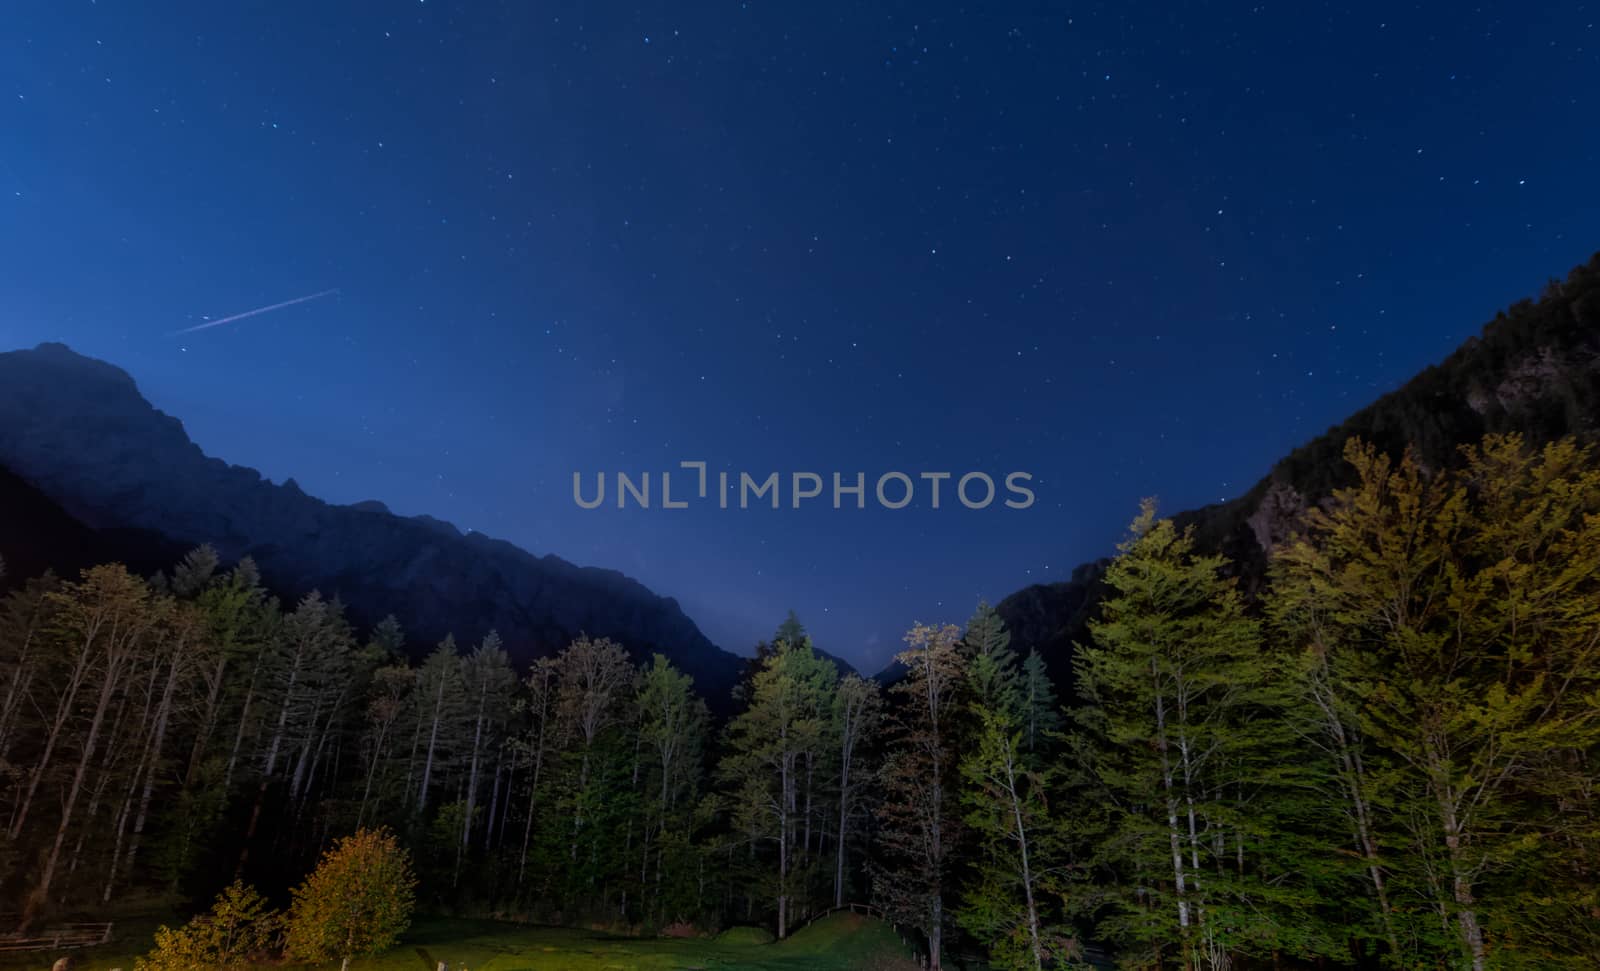 Alpine valley at night, landscape lit by full moon, stars visible, forest in front, trails of airplane above mountains